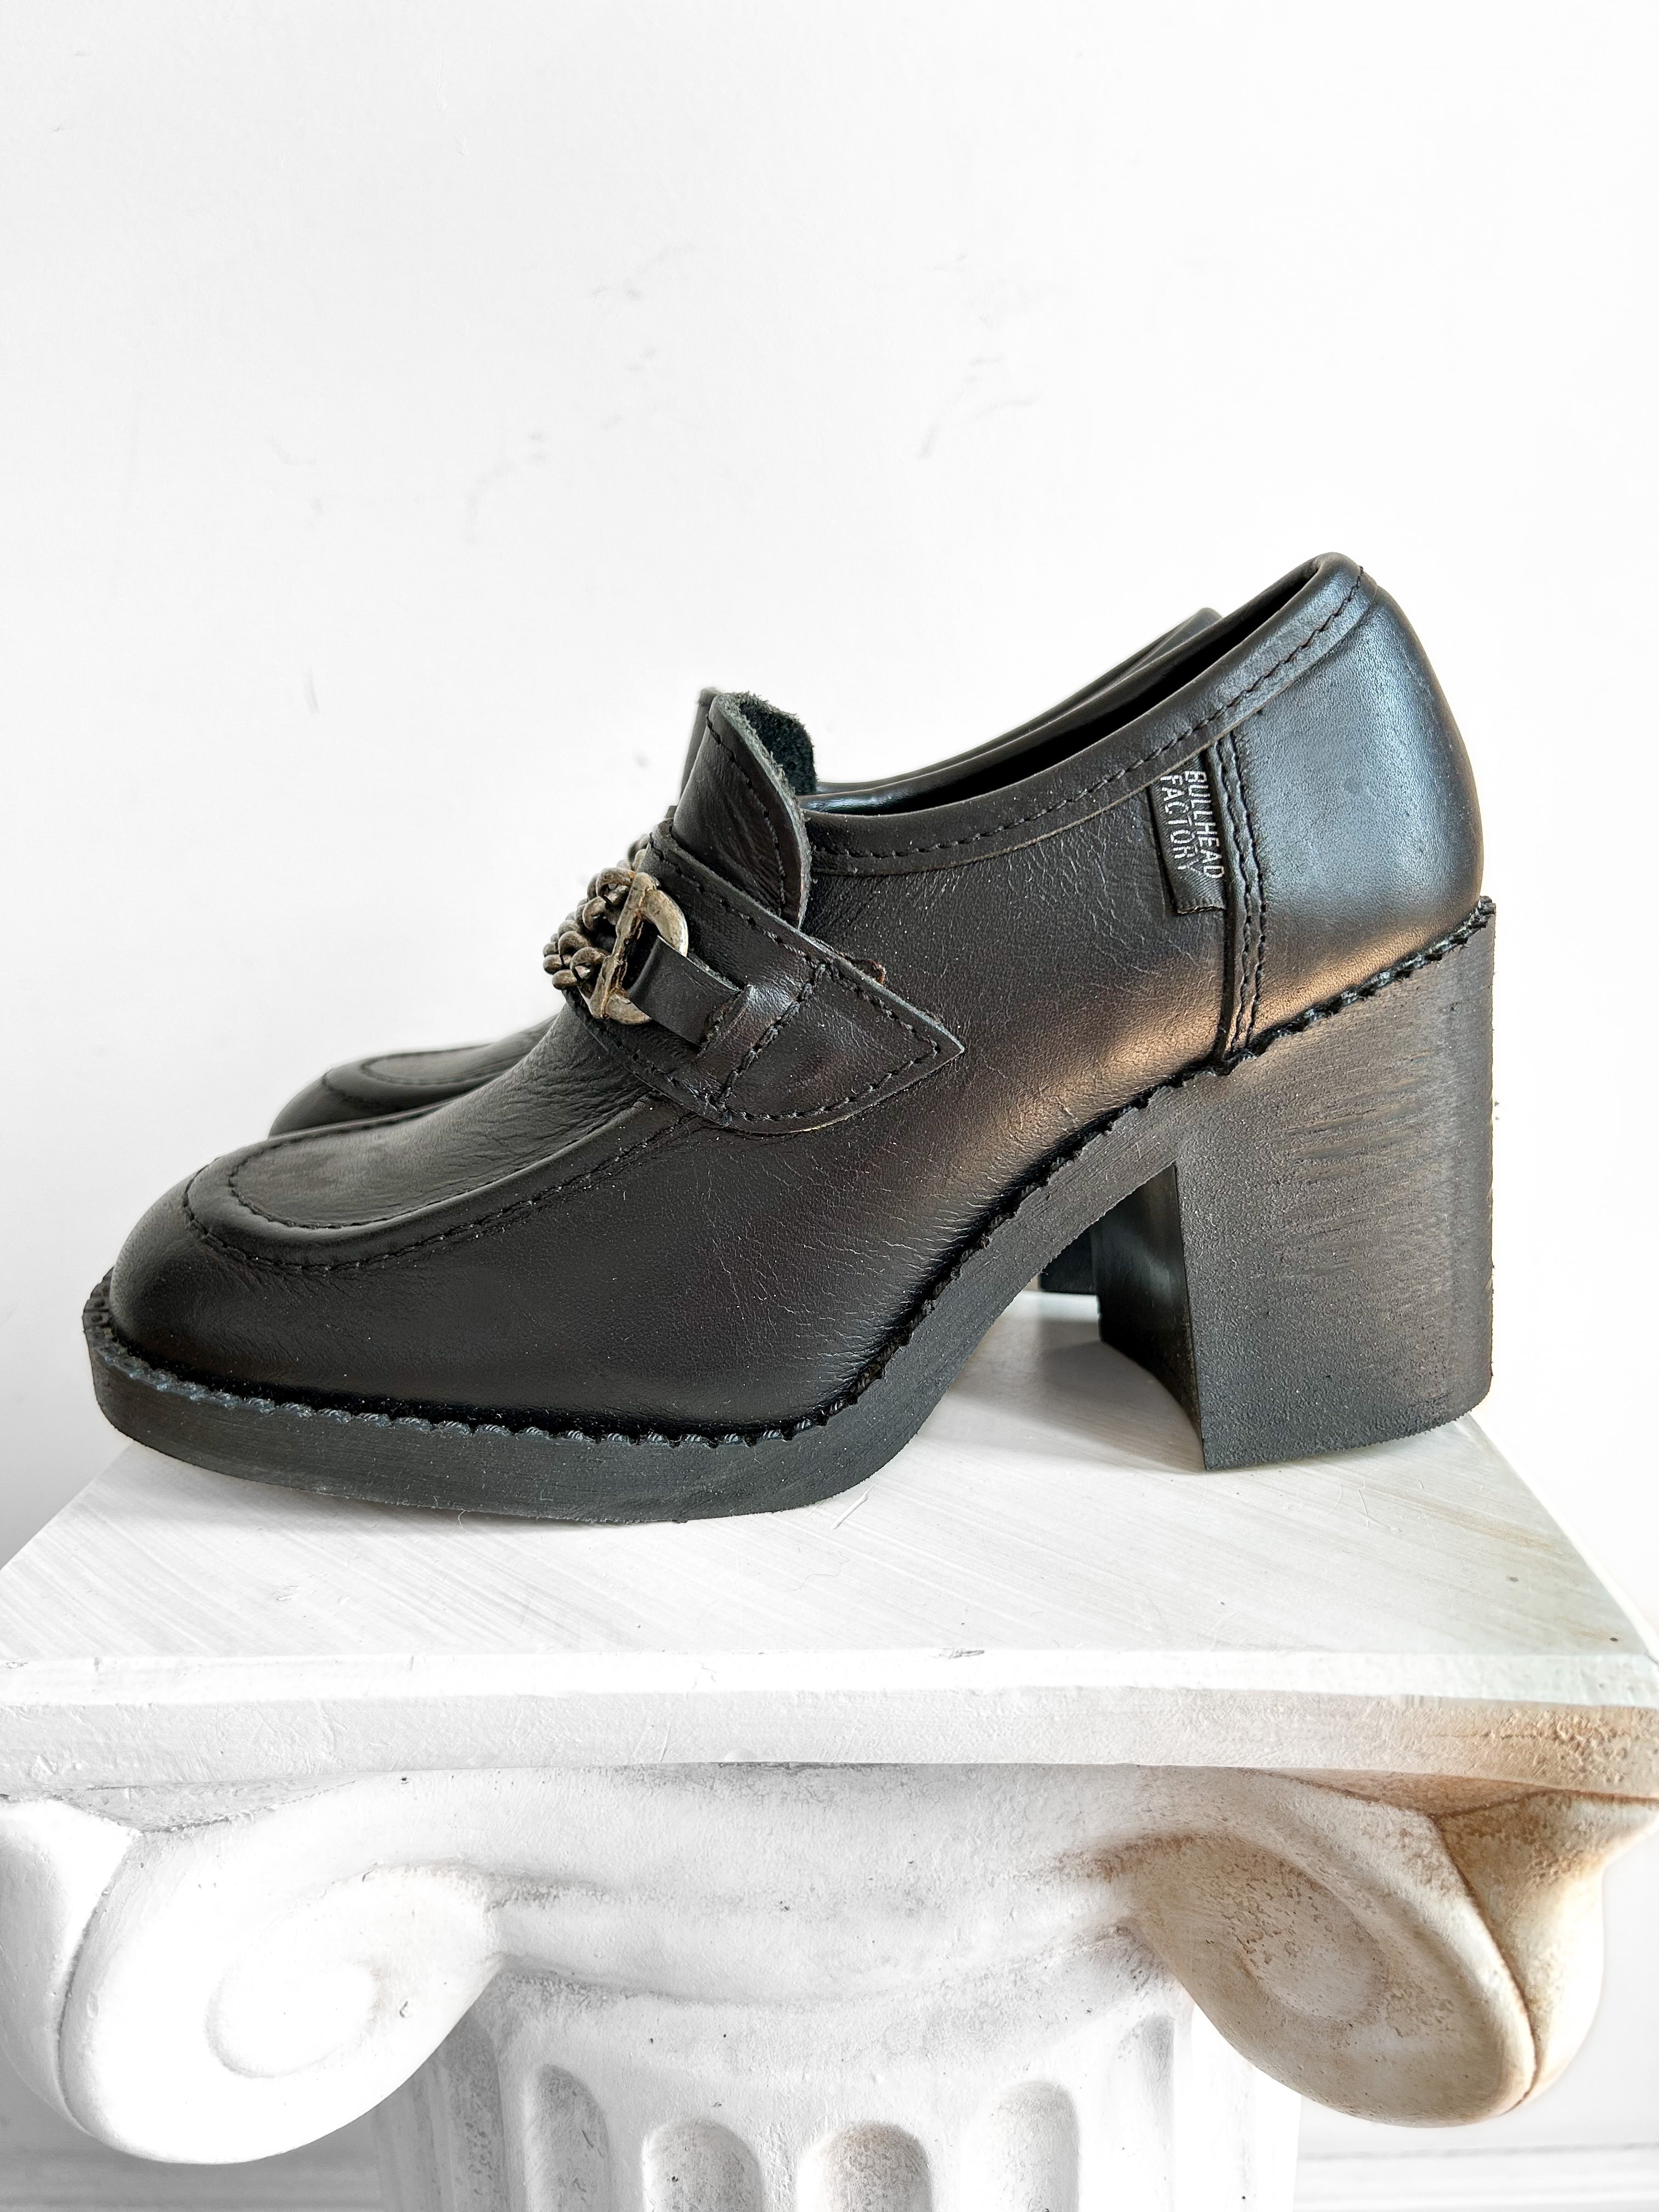 Dead Stock 90s Black Leather Loafer Heels, Size 37, Chunky Heel Shoes, Made in Portugal